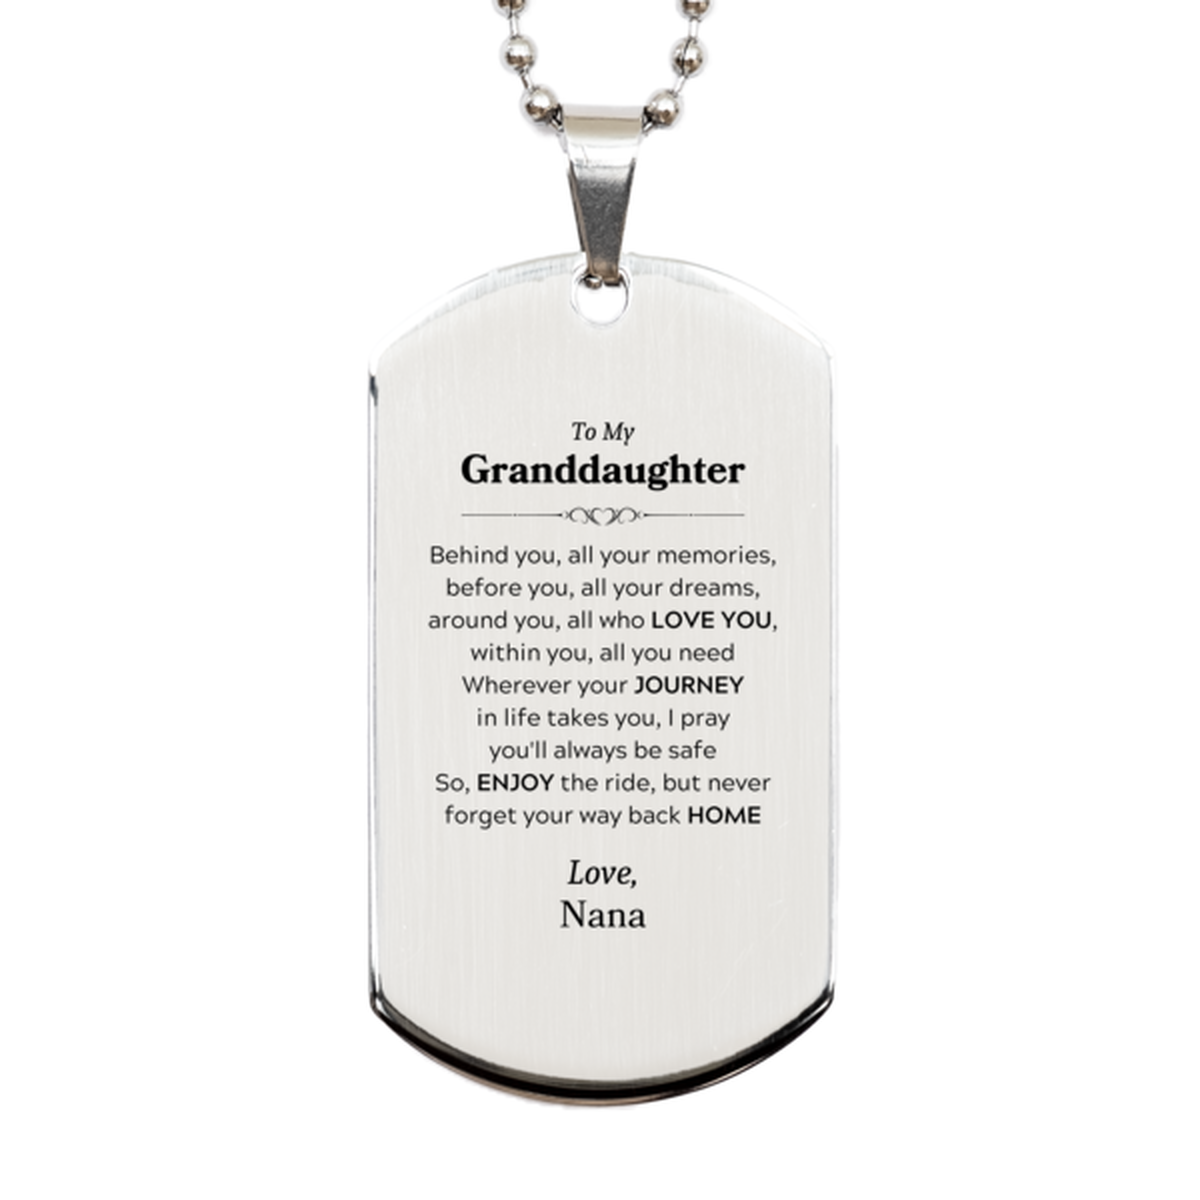 To My Granddaughter Graduation Gifts from Nana, Granddaughter Silver Dog Tag Christmas Birthday Gifts for Granddaughter Behind you, all your memories, before you, all your dreams. Love, Nana